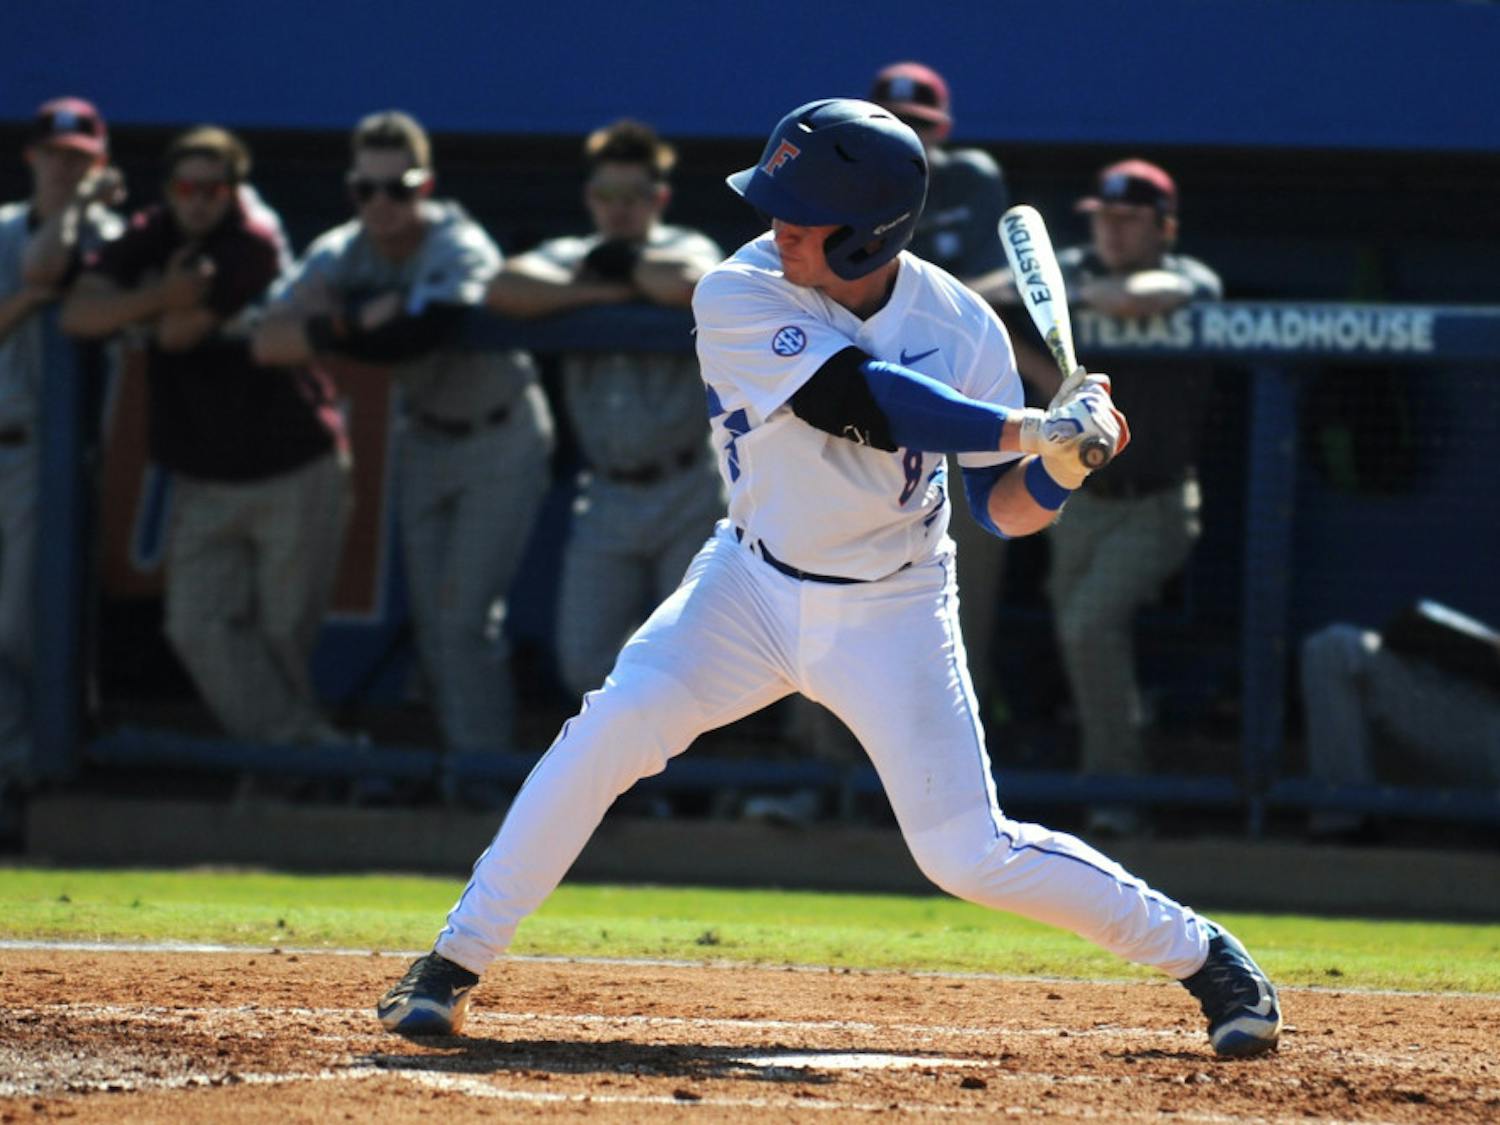 Deacon Liput bats during Florida's 2-1 loss to Mississippi State on April 10, 2016, at McKethan Stadium.